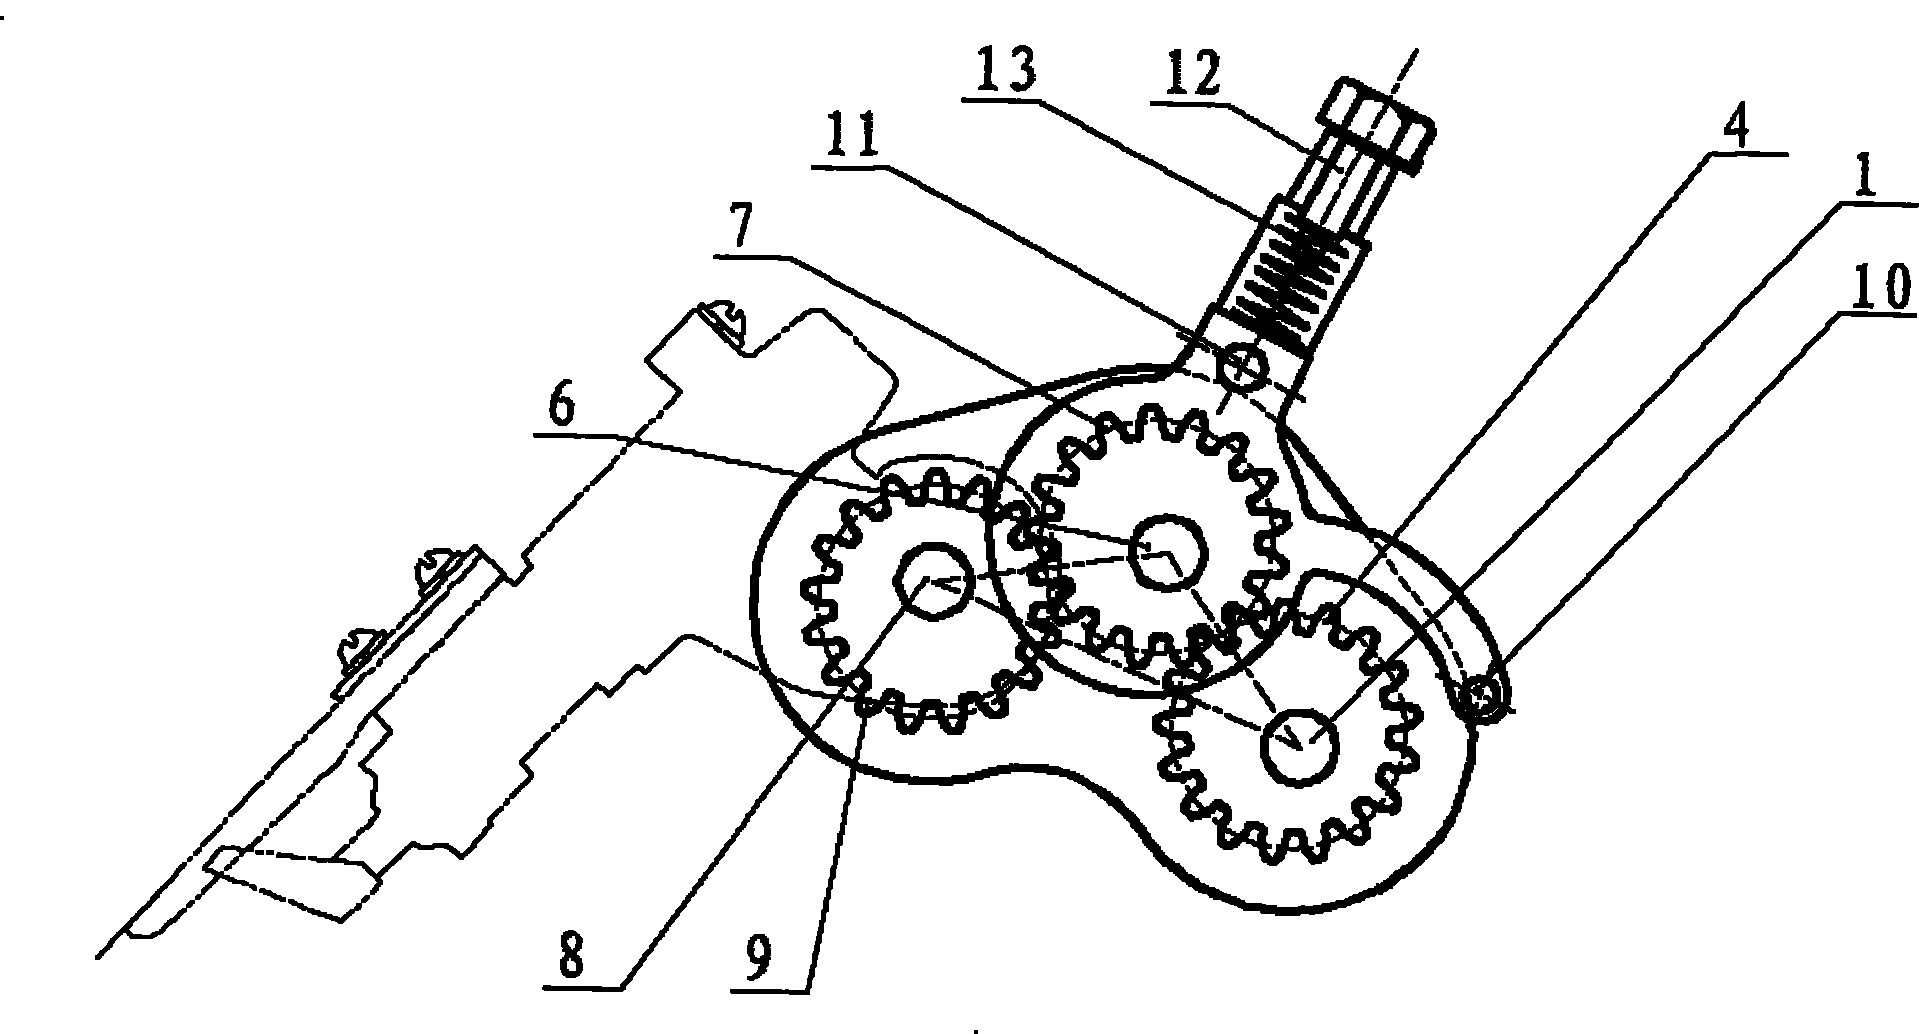 Pitch-play-removing elliptic gear transmission system separately inserting mechanism